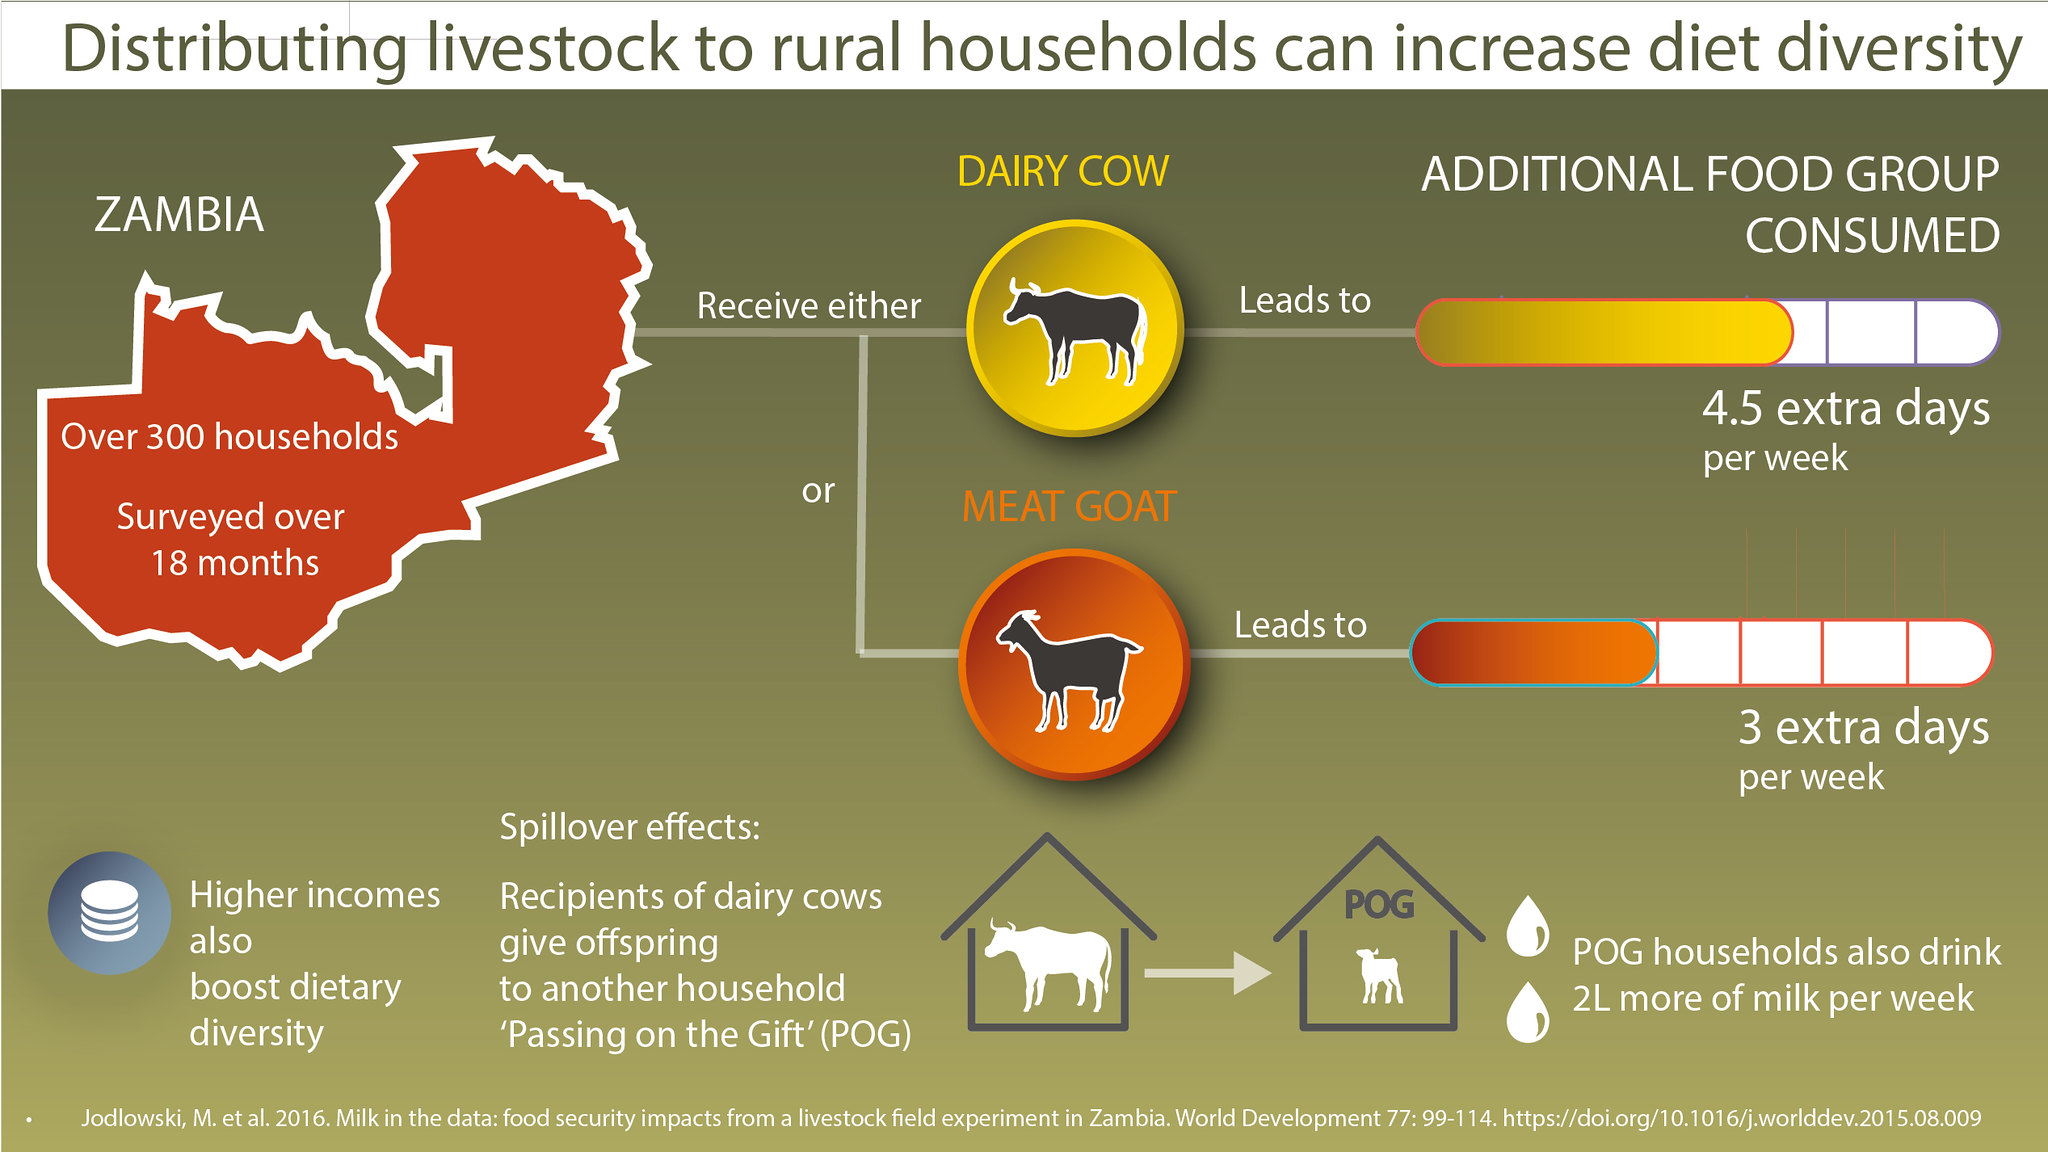 Infographic showing distributing livestock to rural households can increase diet diversity